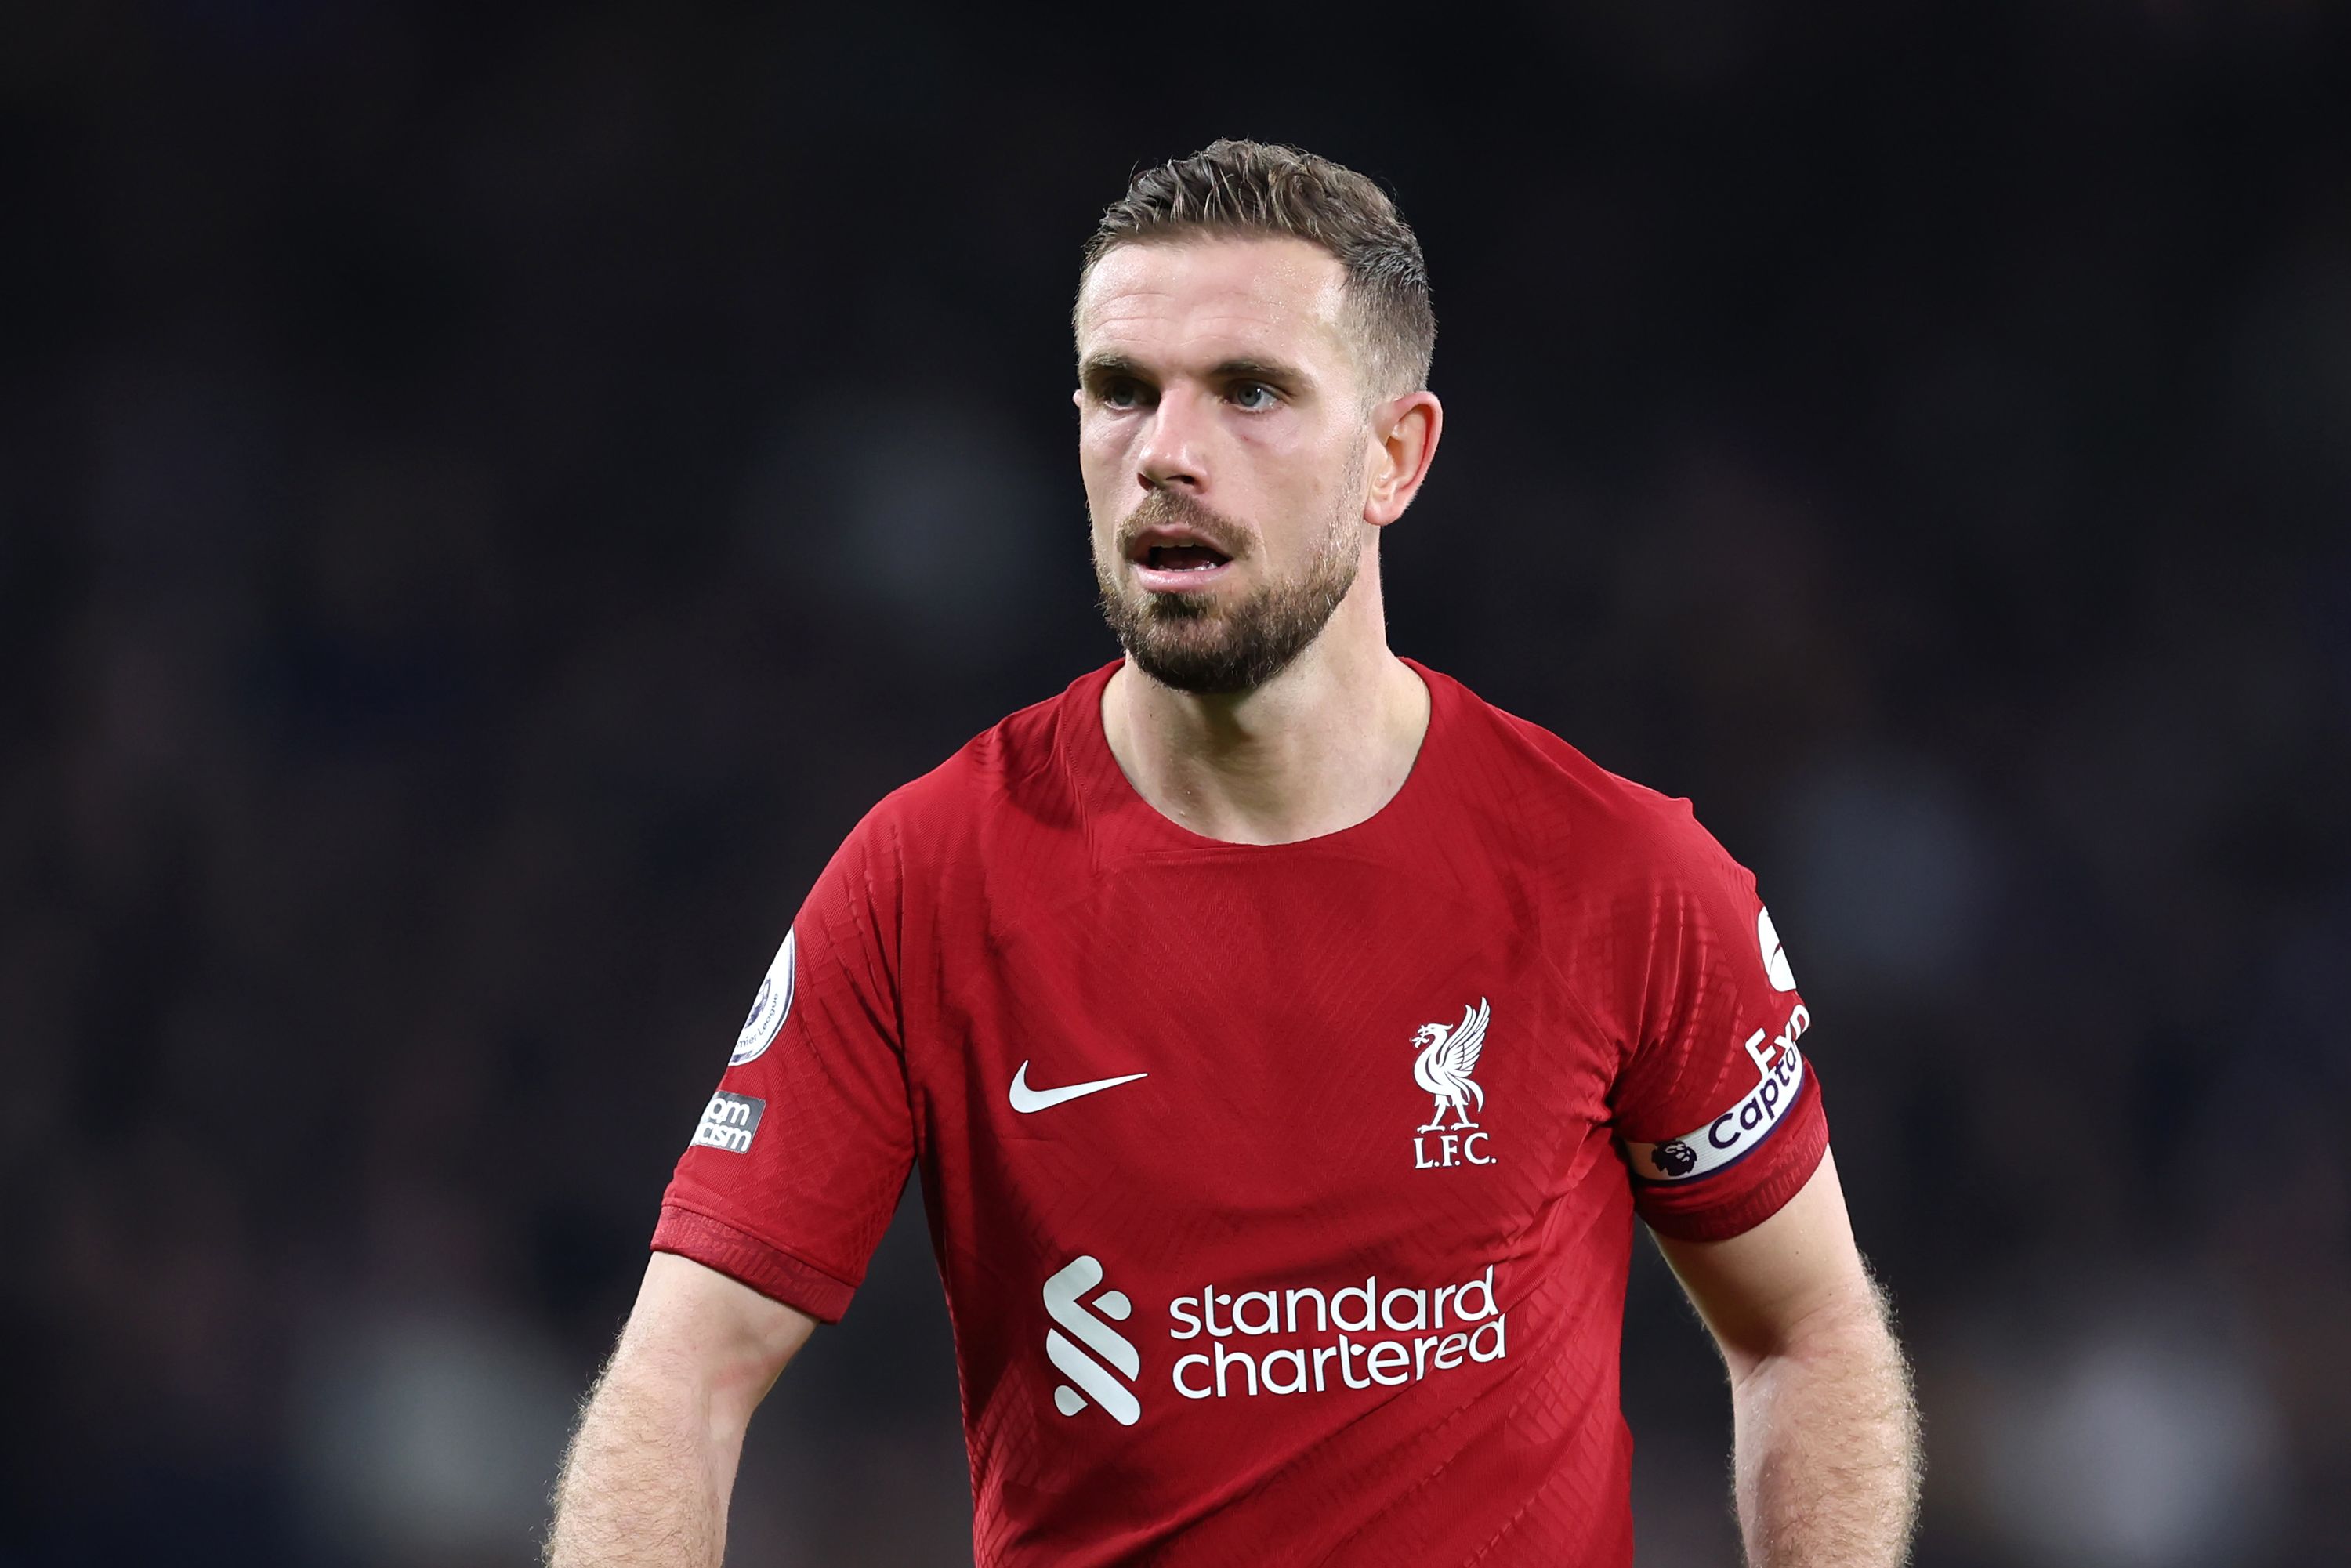 Jordan Henderson looks set to join a Saudi Arabian club. Once seen as an ally for LGBTQ groups, his move has drawn criticism | CNN